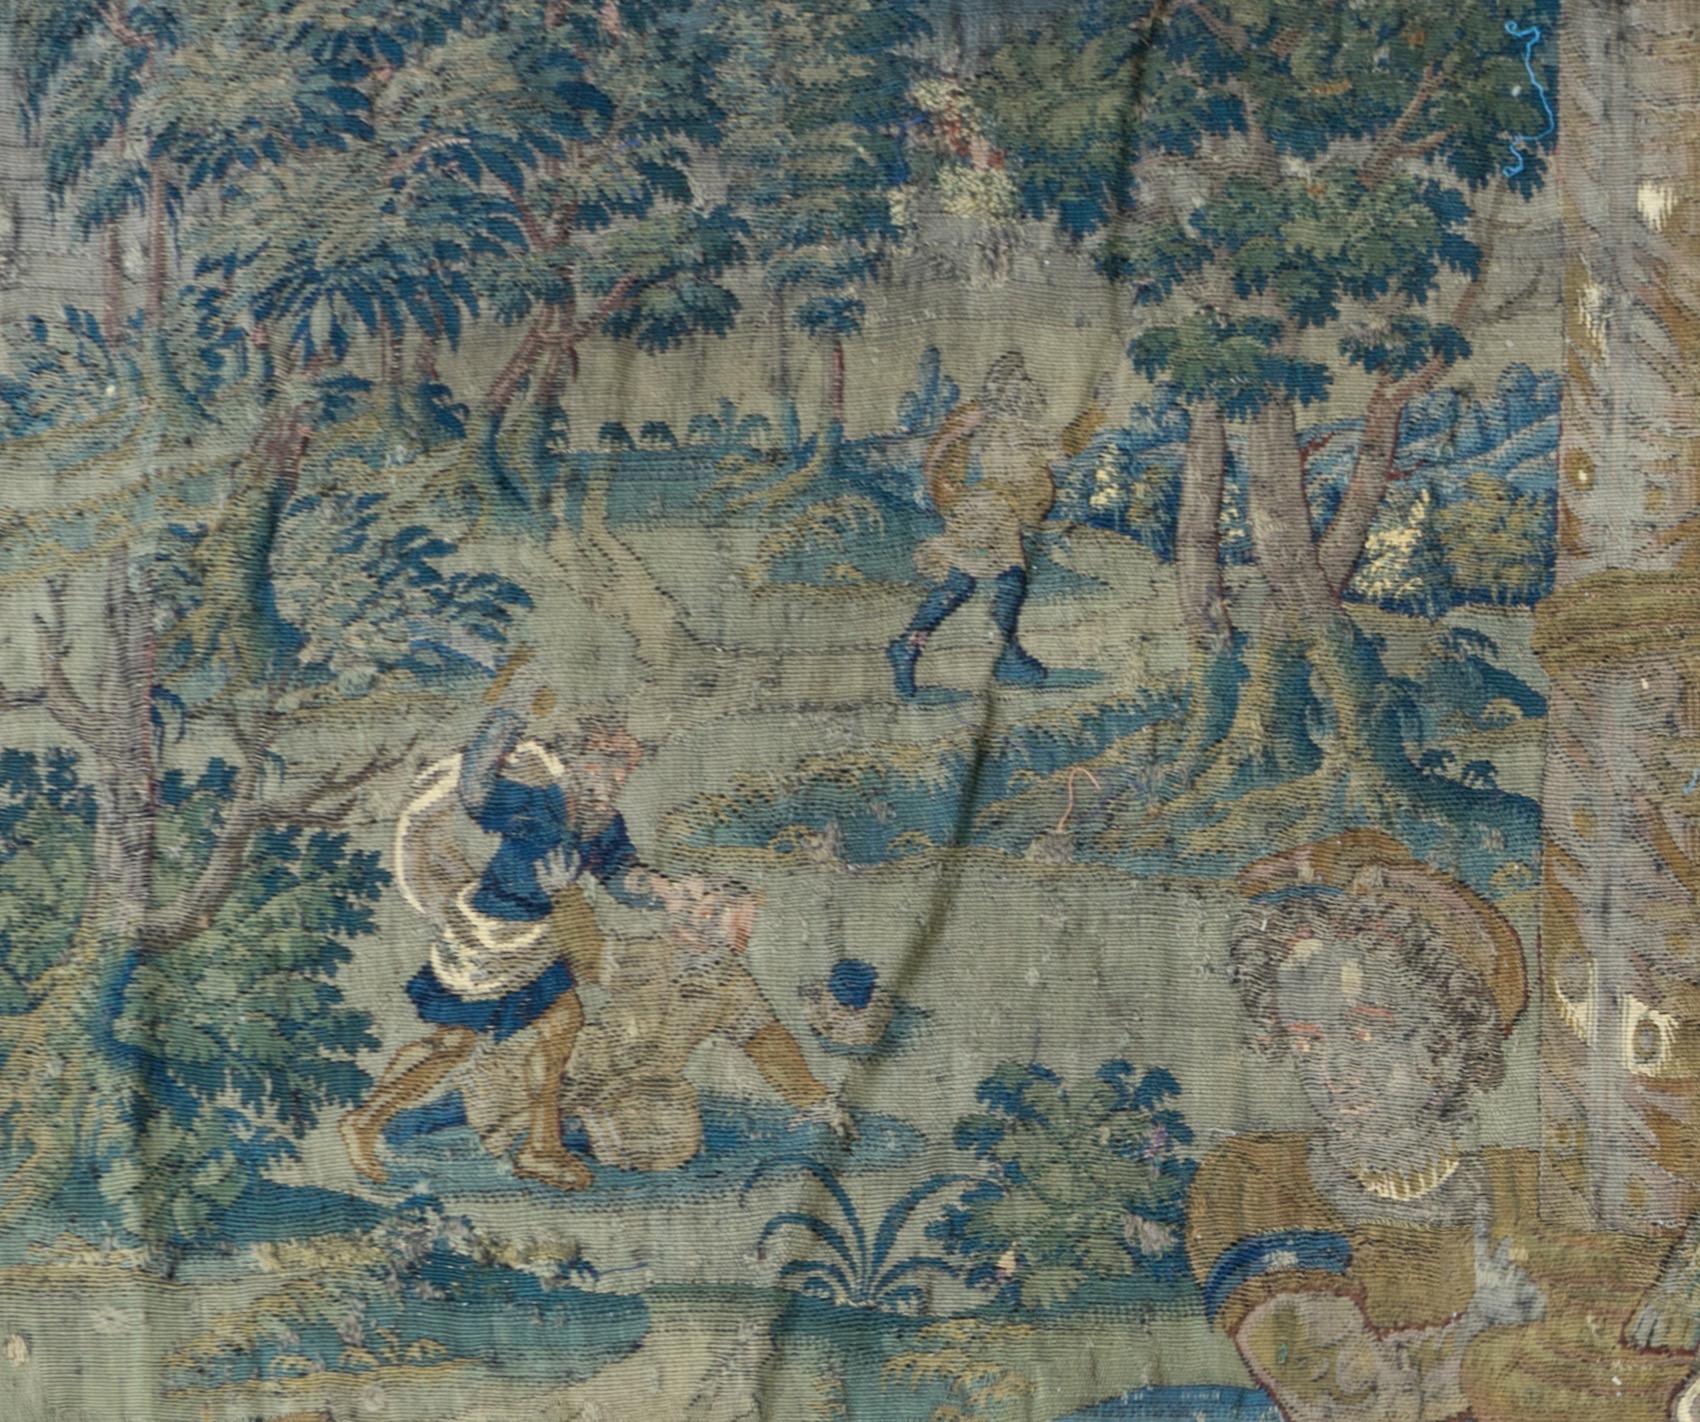 Antique 16th Century Navy Blue and Gold Flemish Renaissance Biblical Tapestry In Good Condition For Sale In New York, NY